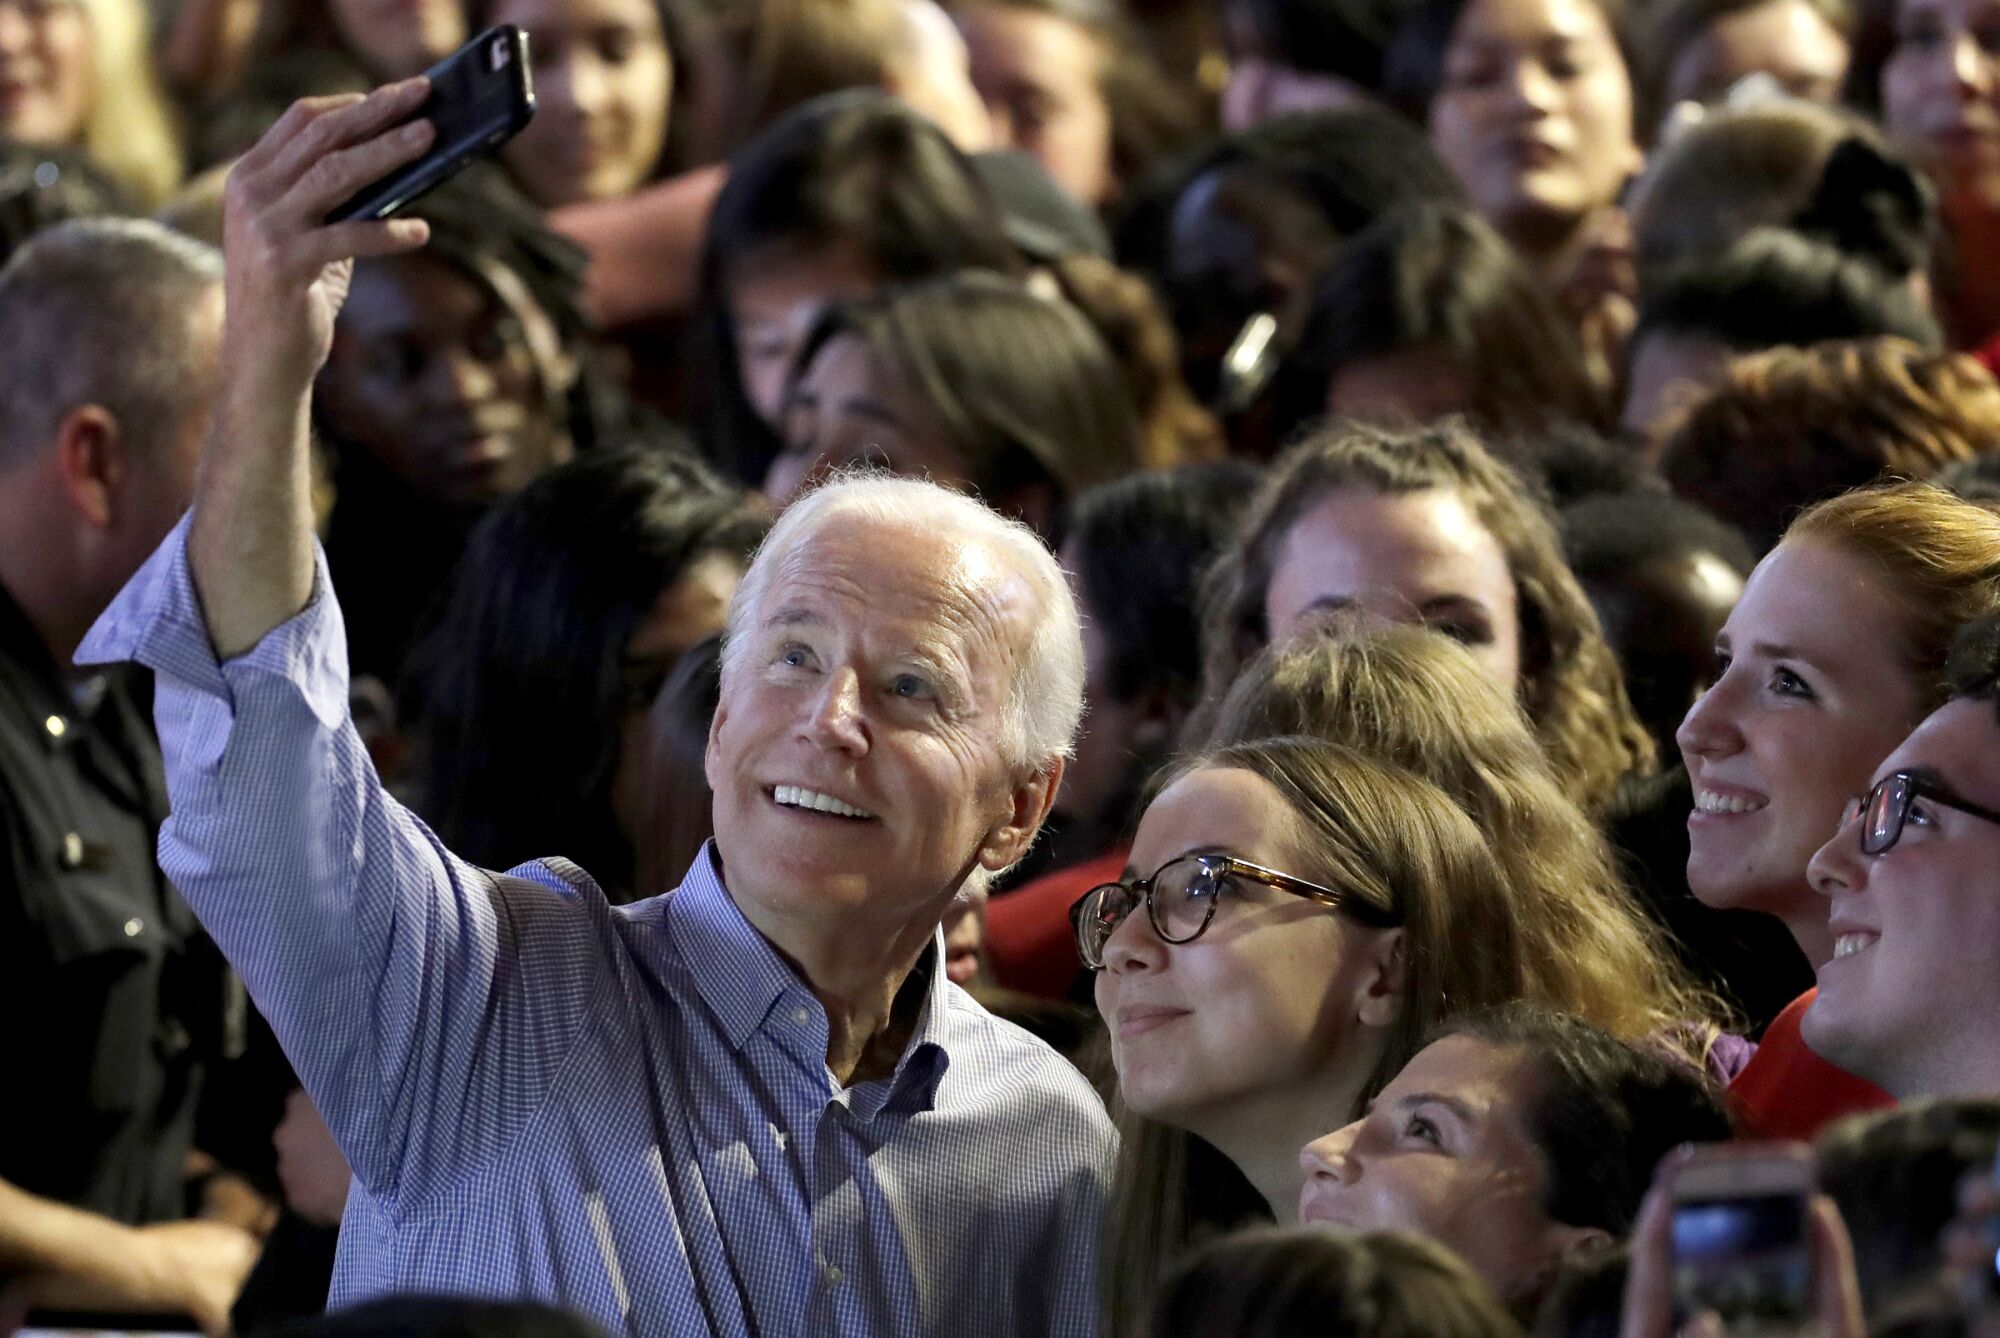 Biden takes a selfie with students at Rutgers University in October 2017.